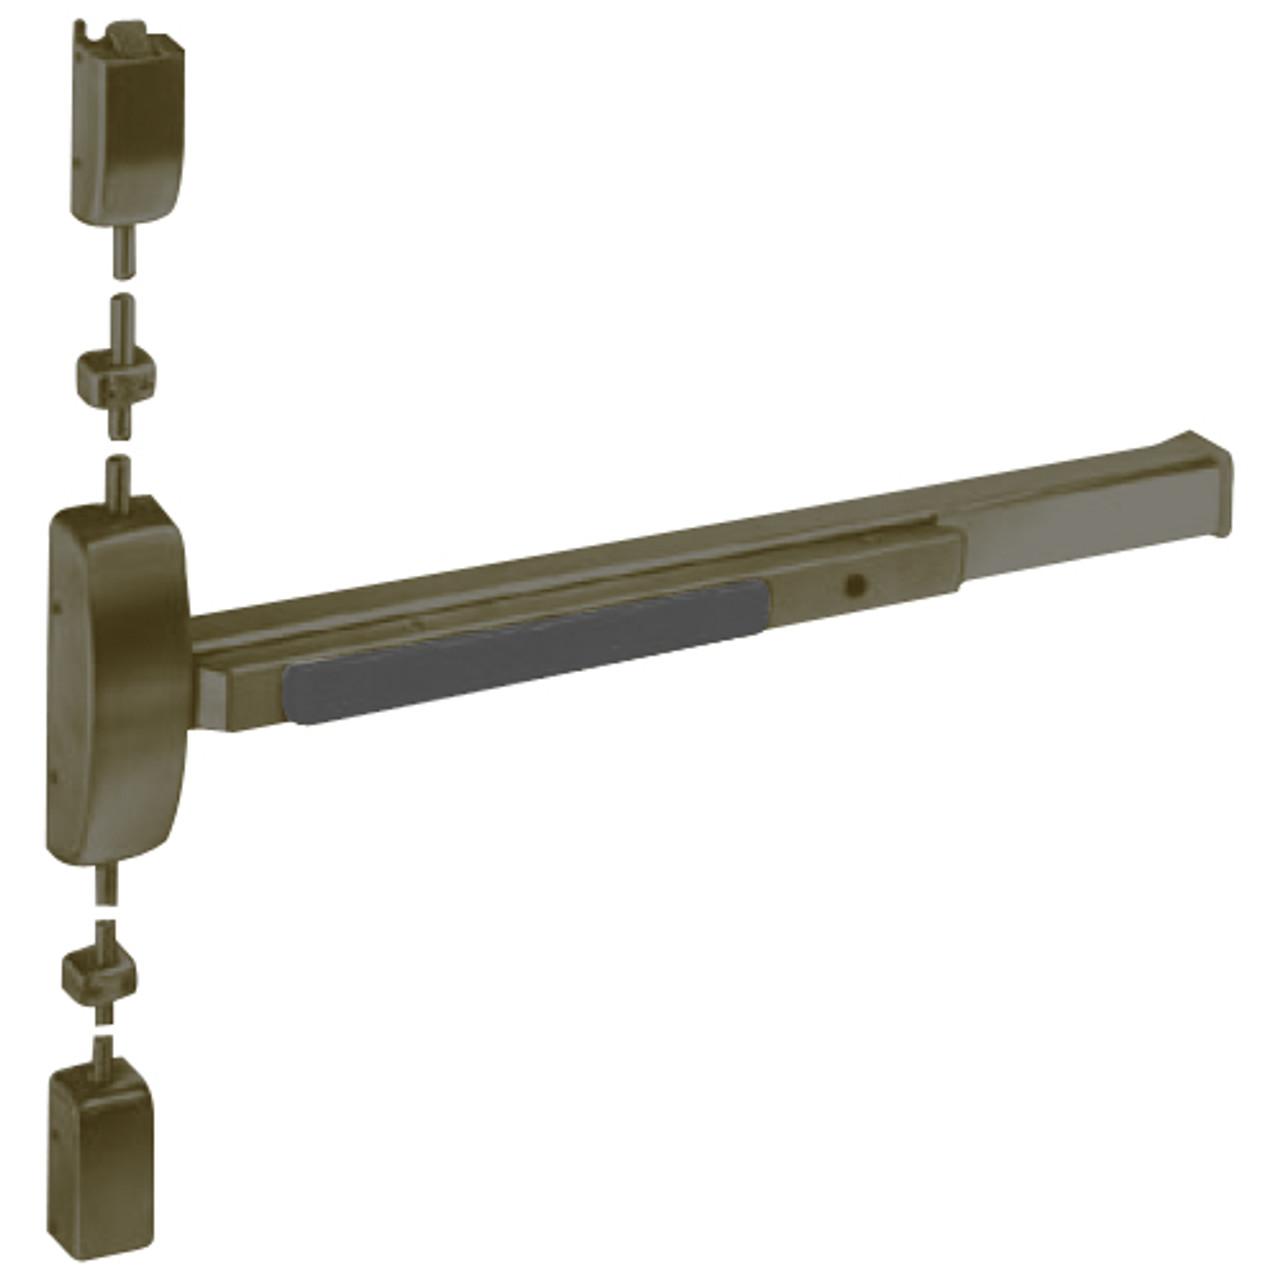 8710G-LHR-10B Sargent 80 Series Exit Only Surface Vertical Rod Exit Device in Oil Rubbed Bronze